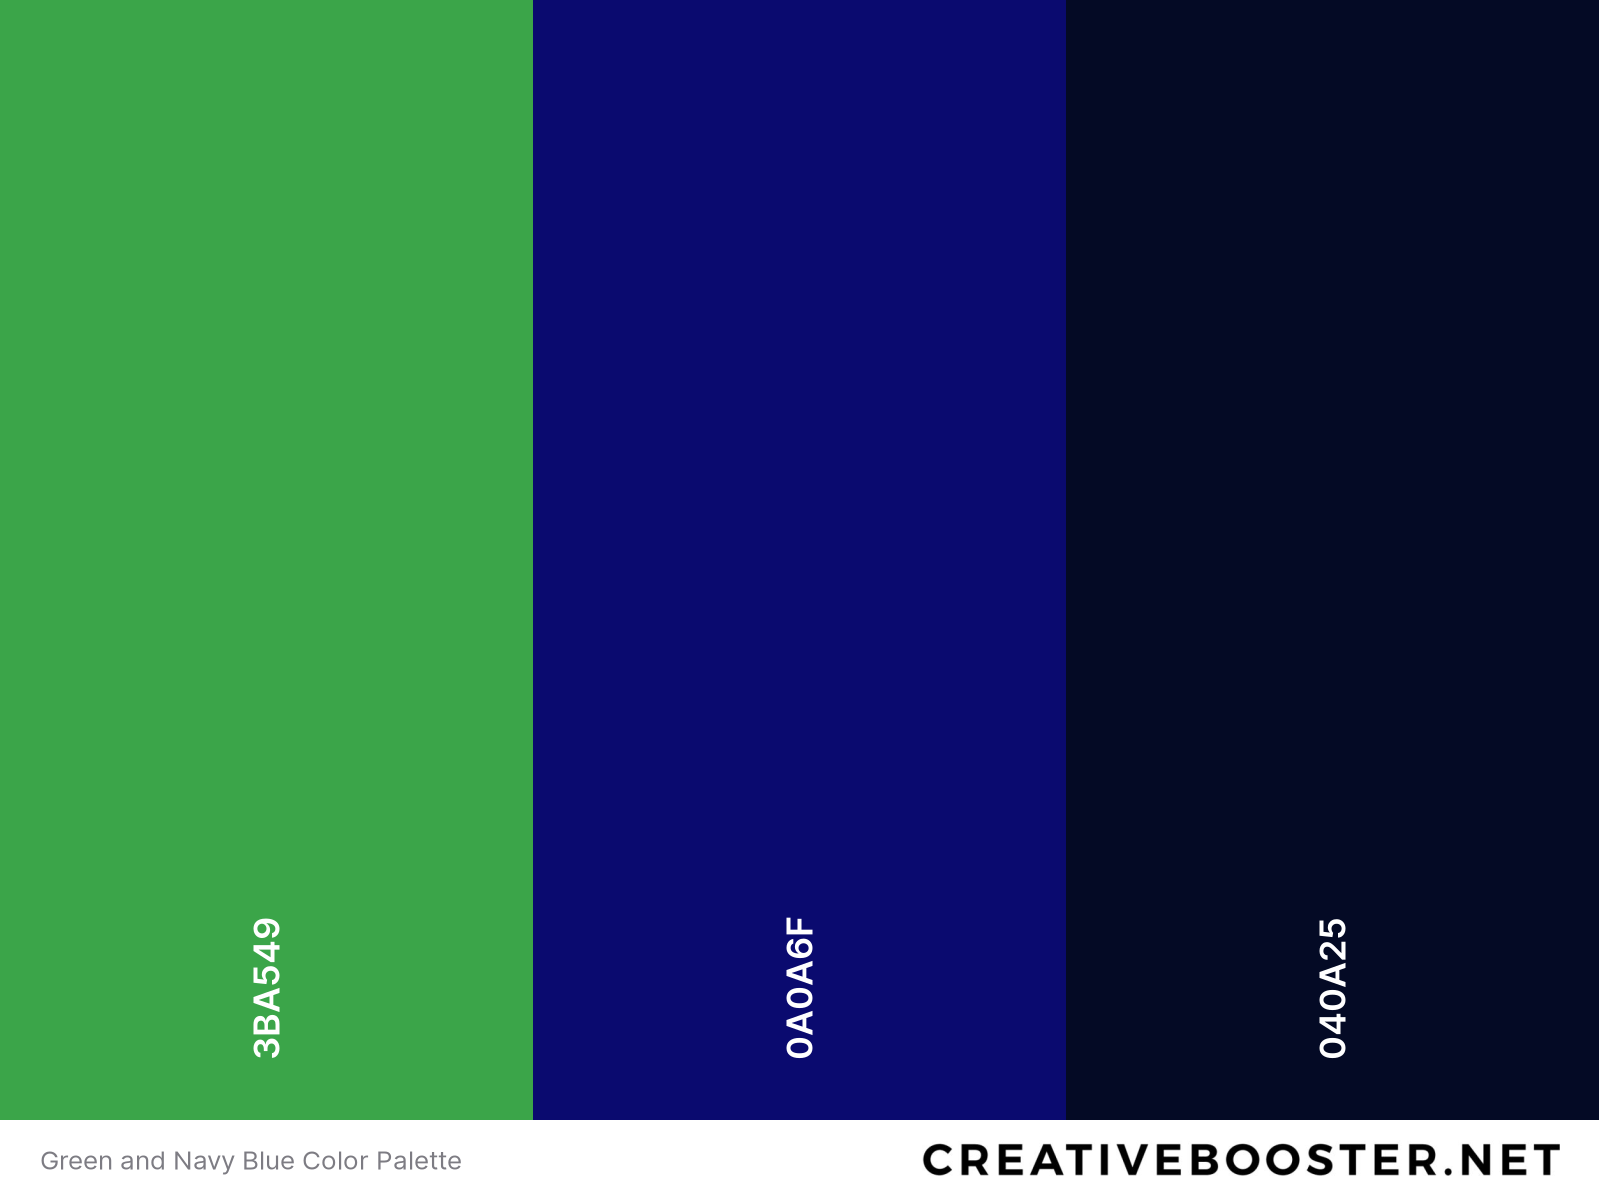 Green and Navy Blue Color Palette